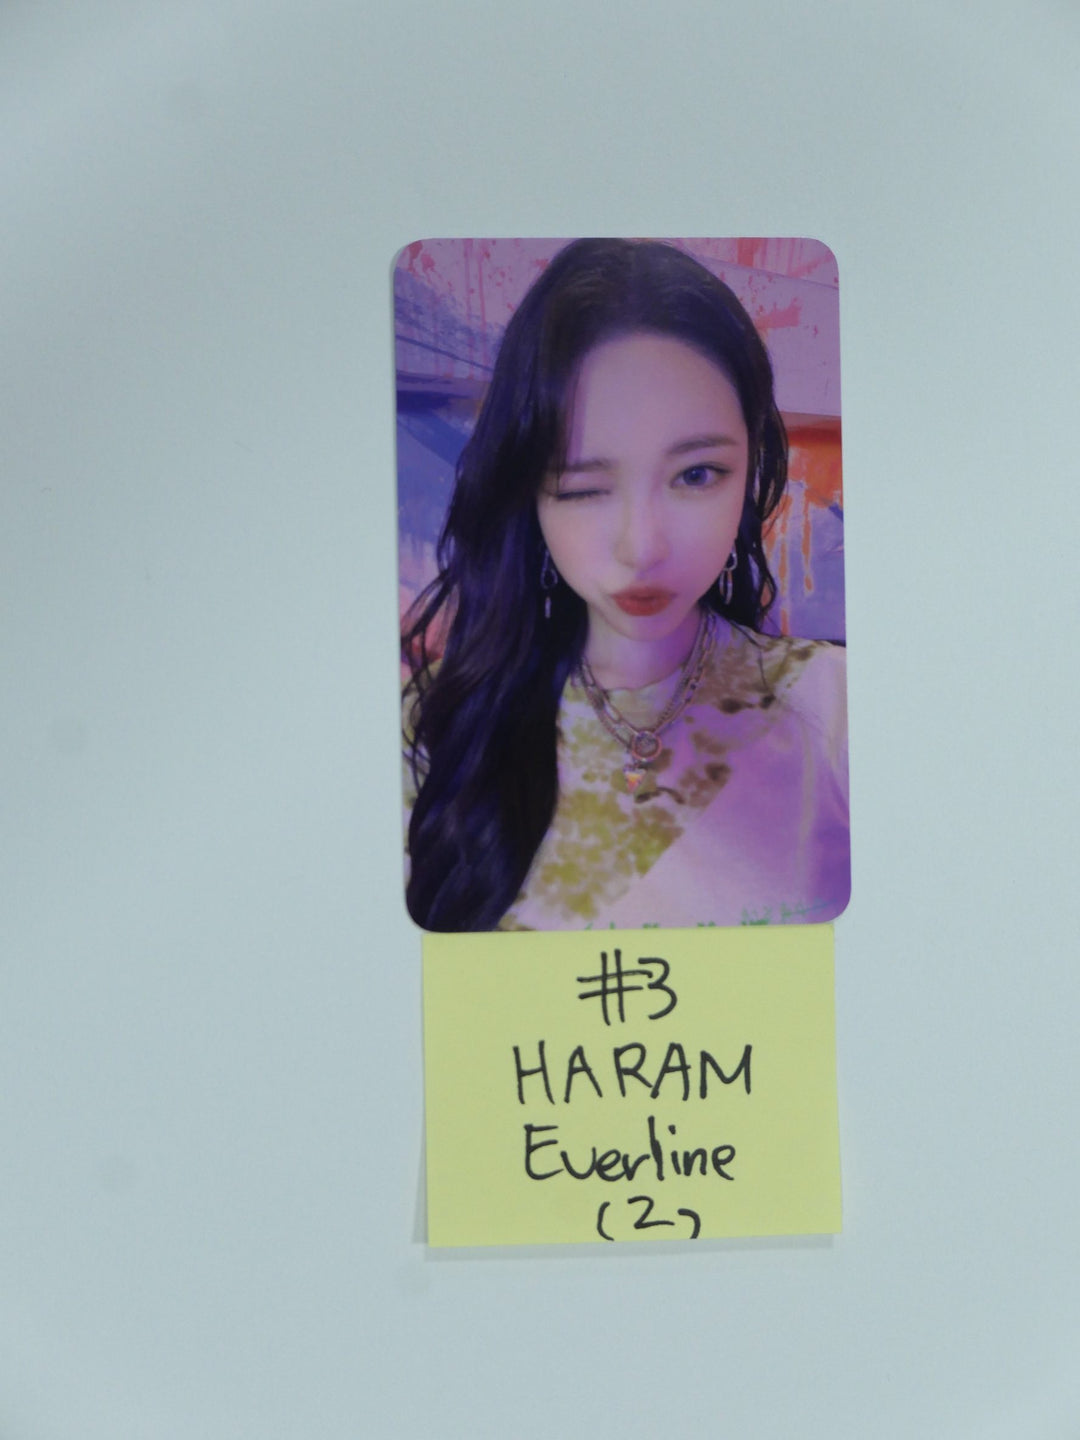 Billlie 'the collective soul and unconscious: chapter one' - Everline Fansign Event Photocard